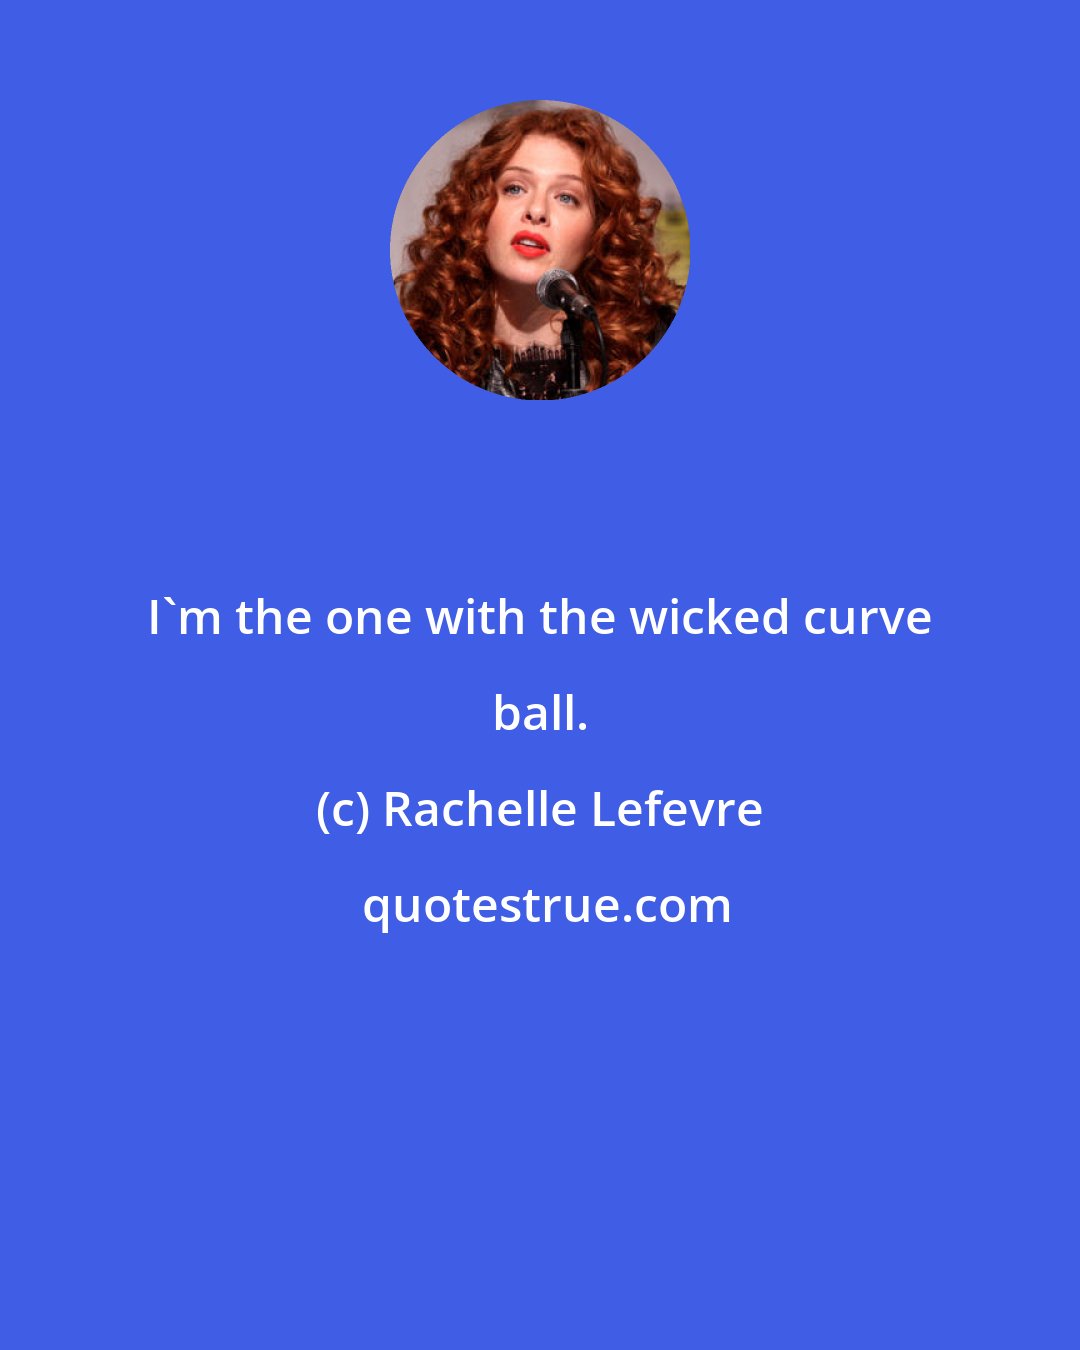 Rachelle Lefevre: I'm the one with the wicked curve ball.